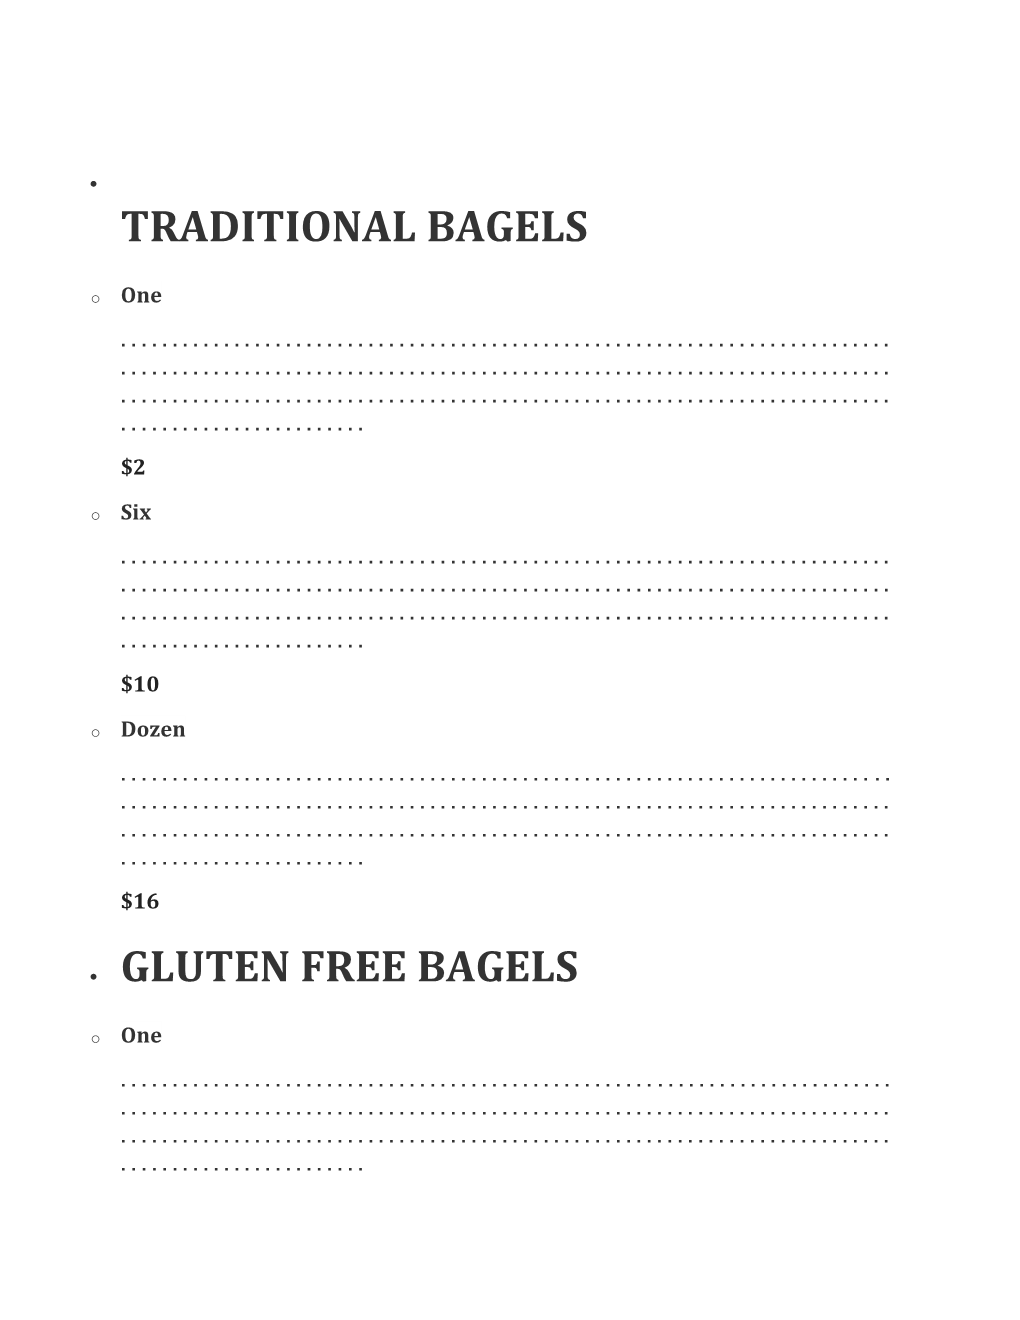 Traditional Bagels • Gluten Free Bagels